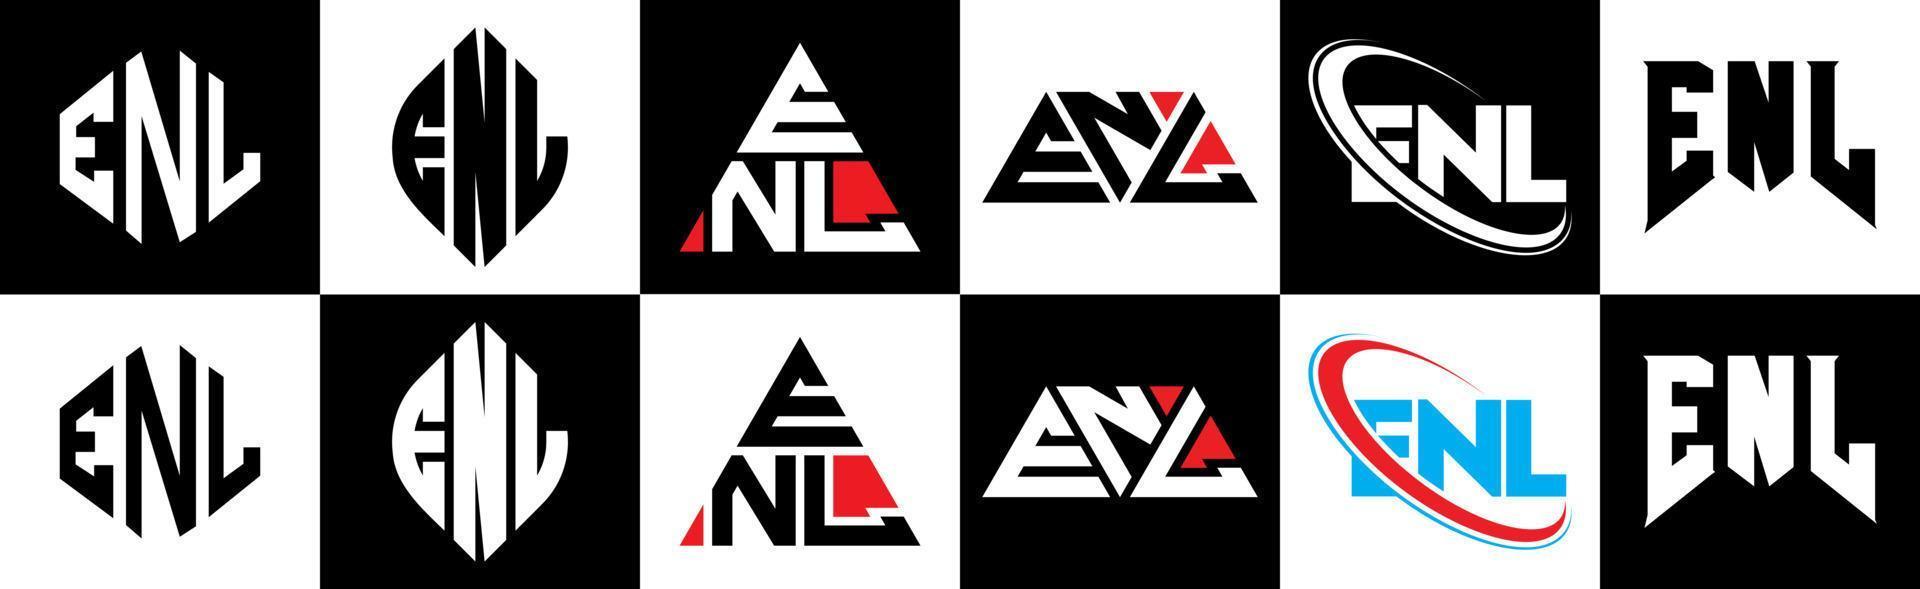 ENL letter logo design in six style. ENL polygon, circle, triangle, hexagon, flat and simple style with black and white color variation letter logo set in one artboard. ENL minimalist and classic logo vector